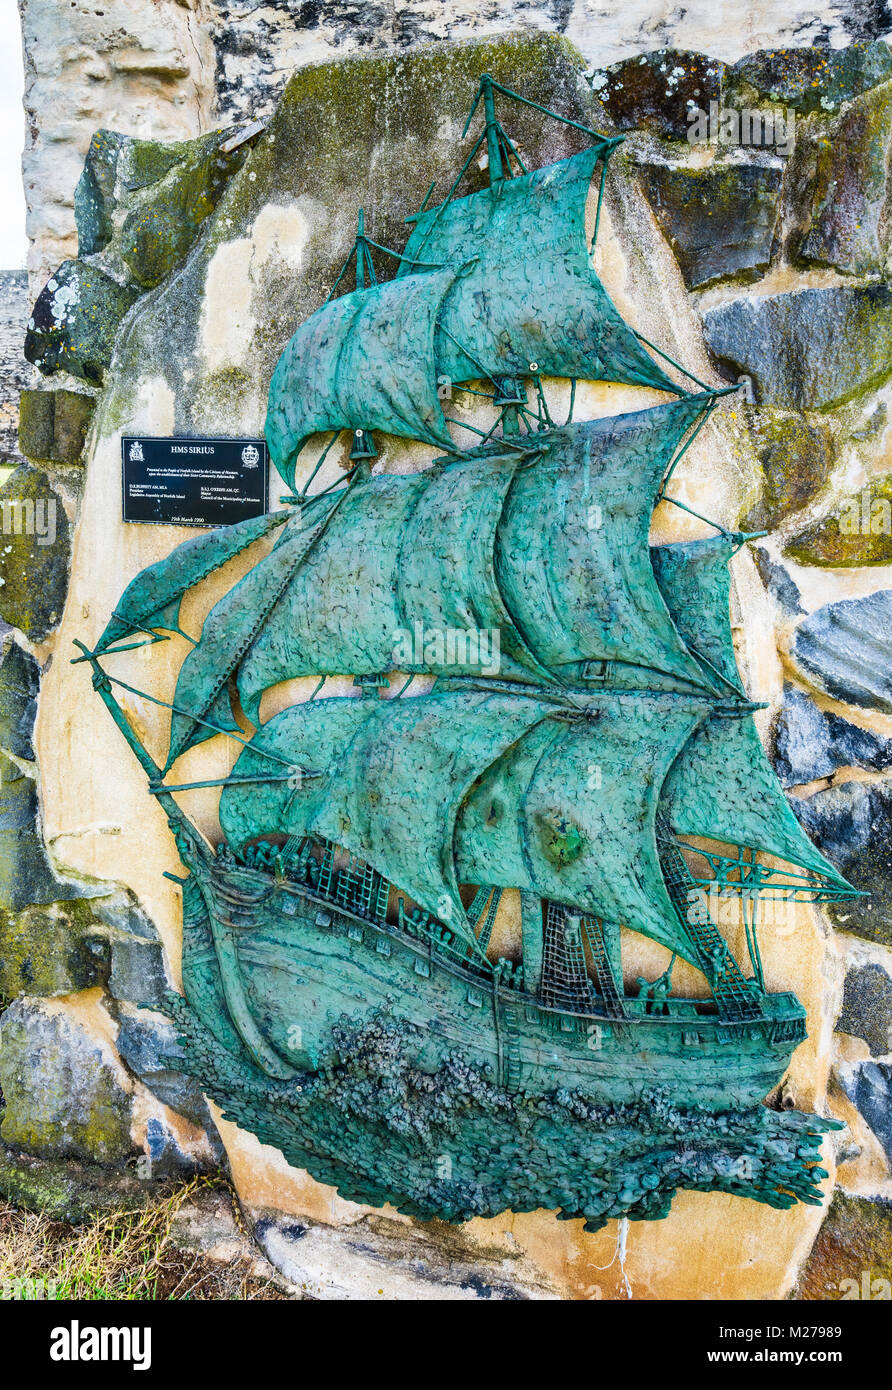 Norfolk Island, Australian external territory, Kingston, Prisoners Barracks, relief sculpture of HMS Sirius, which was wrecked south east of Kingston  Stock Photo